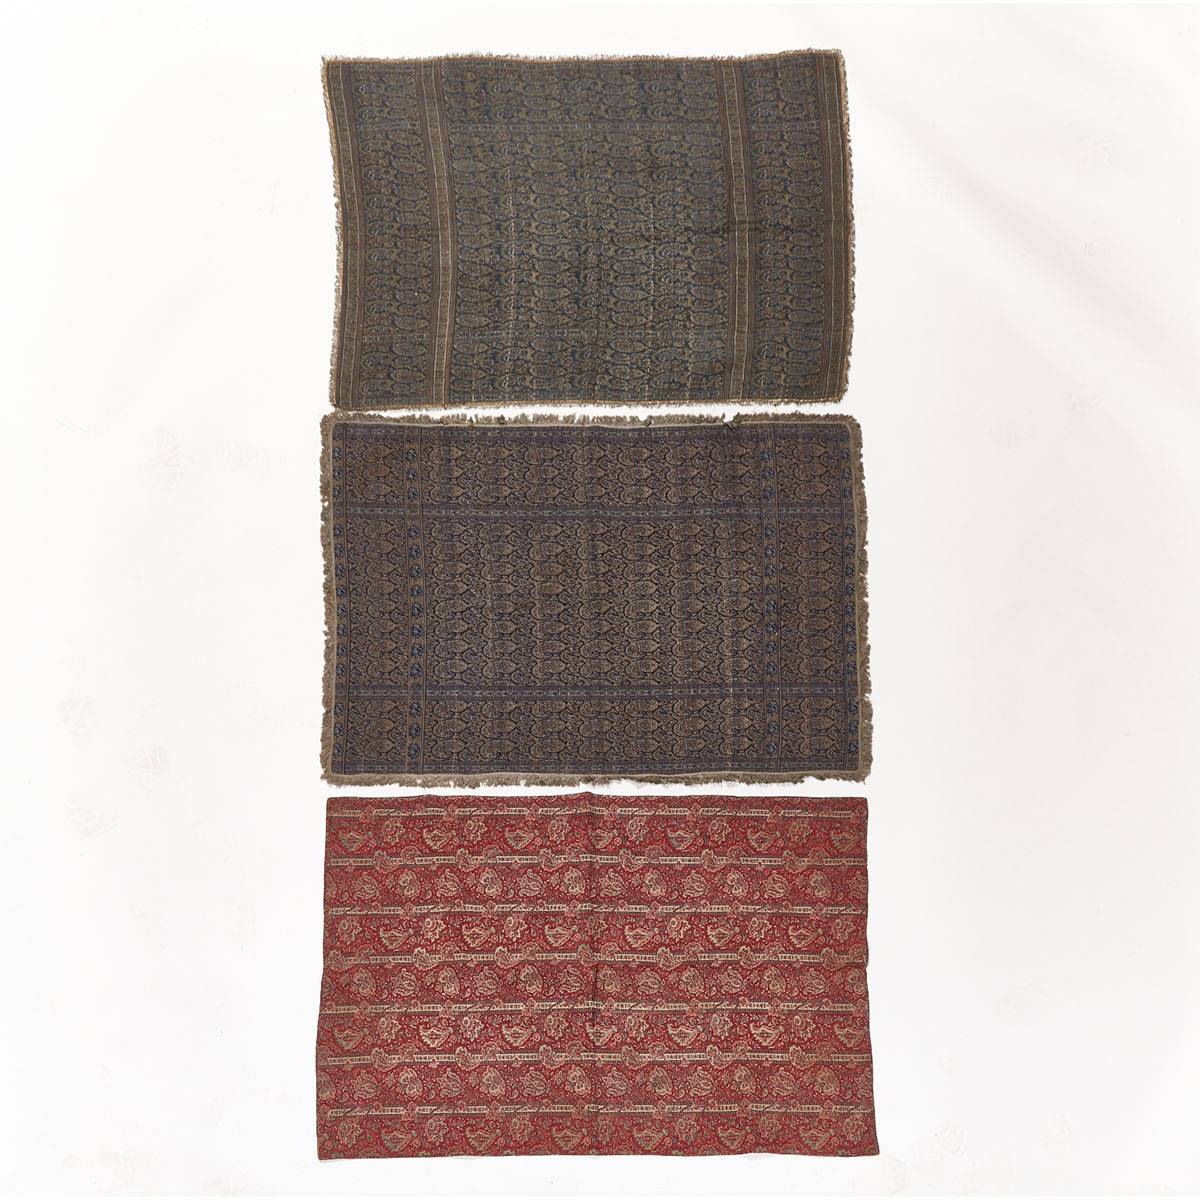 Two Persian Cruelwork Cotton Throws together with a Persian Printed Throw, early 20th century